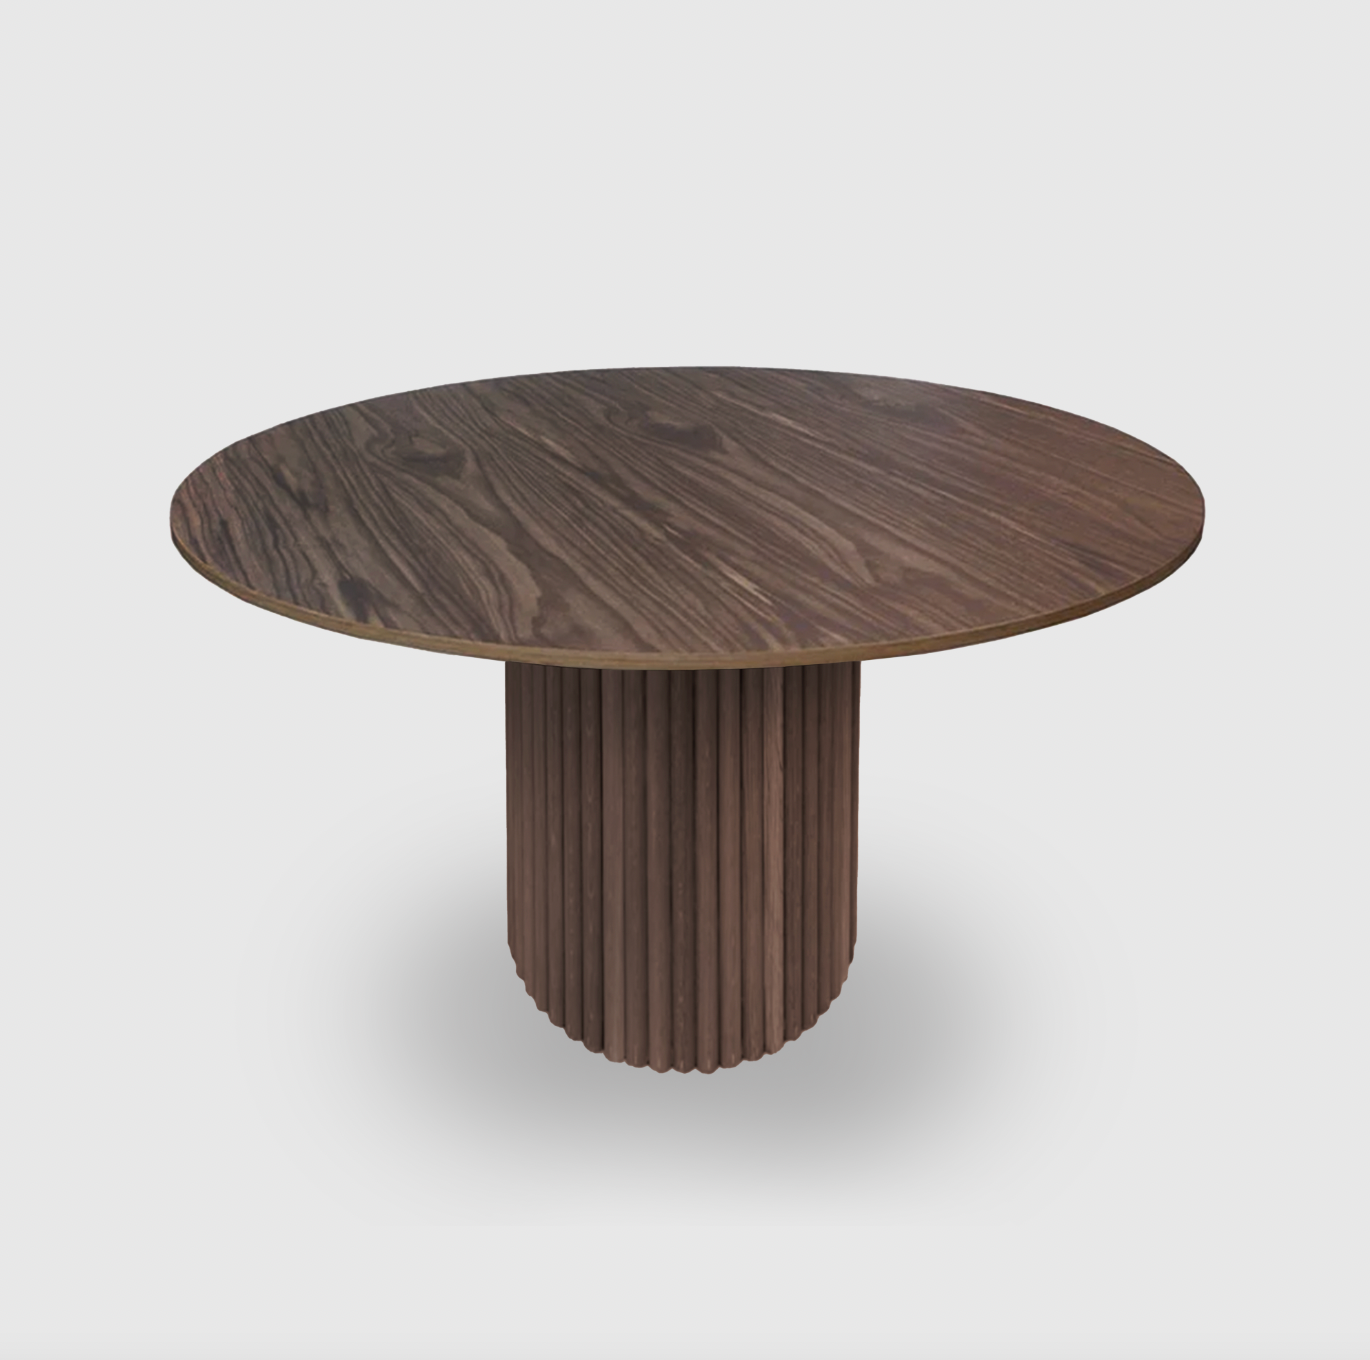 Bloom Round Dining Table - Walnut